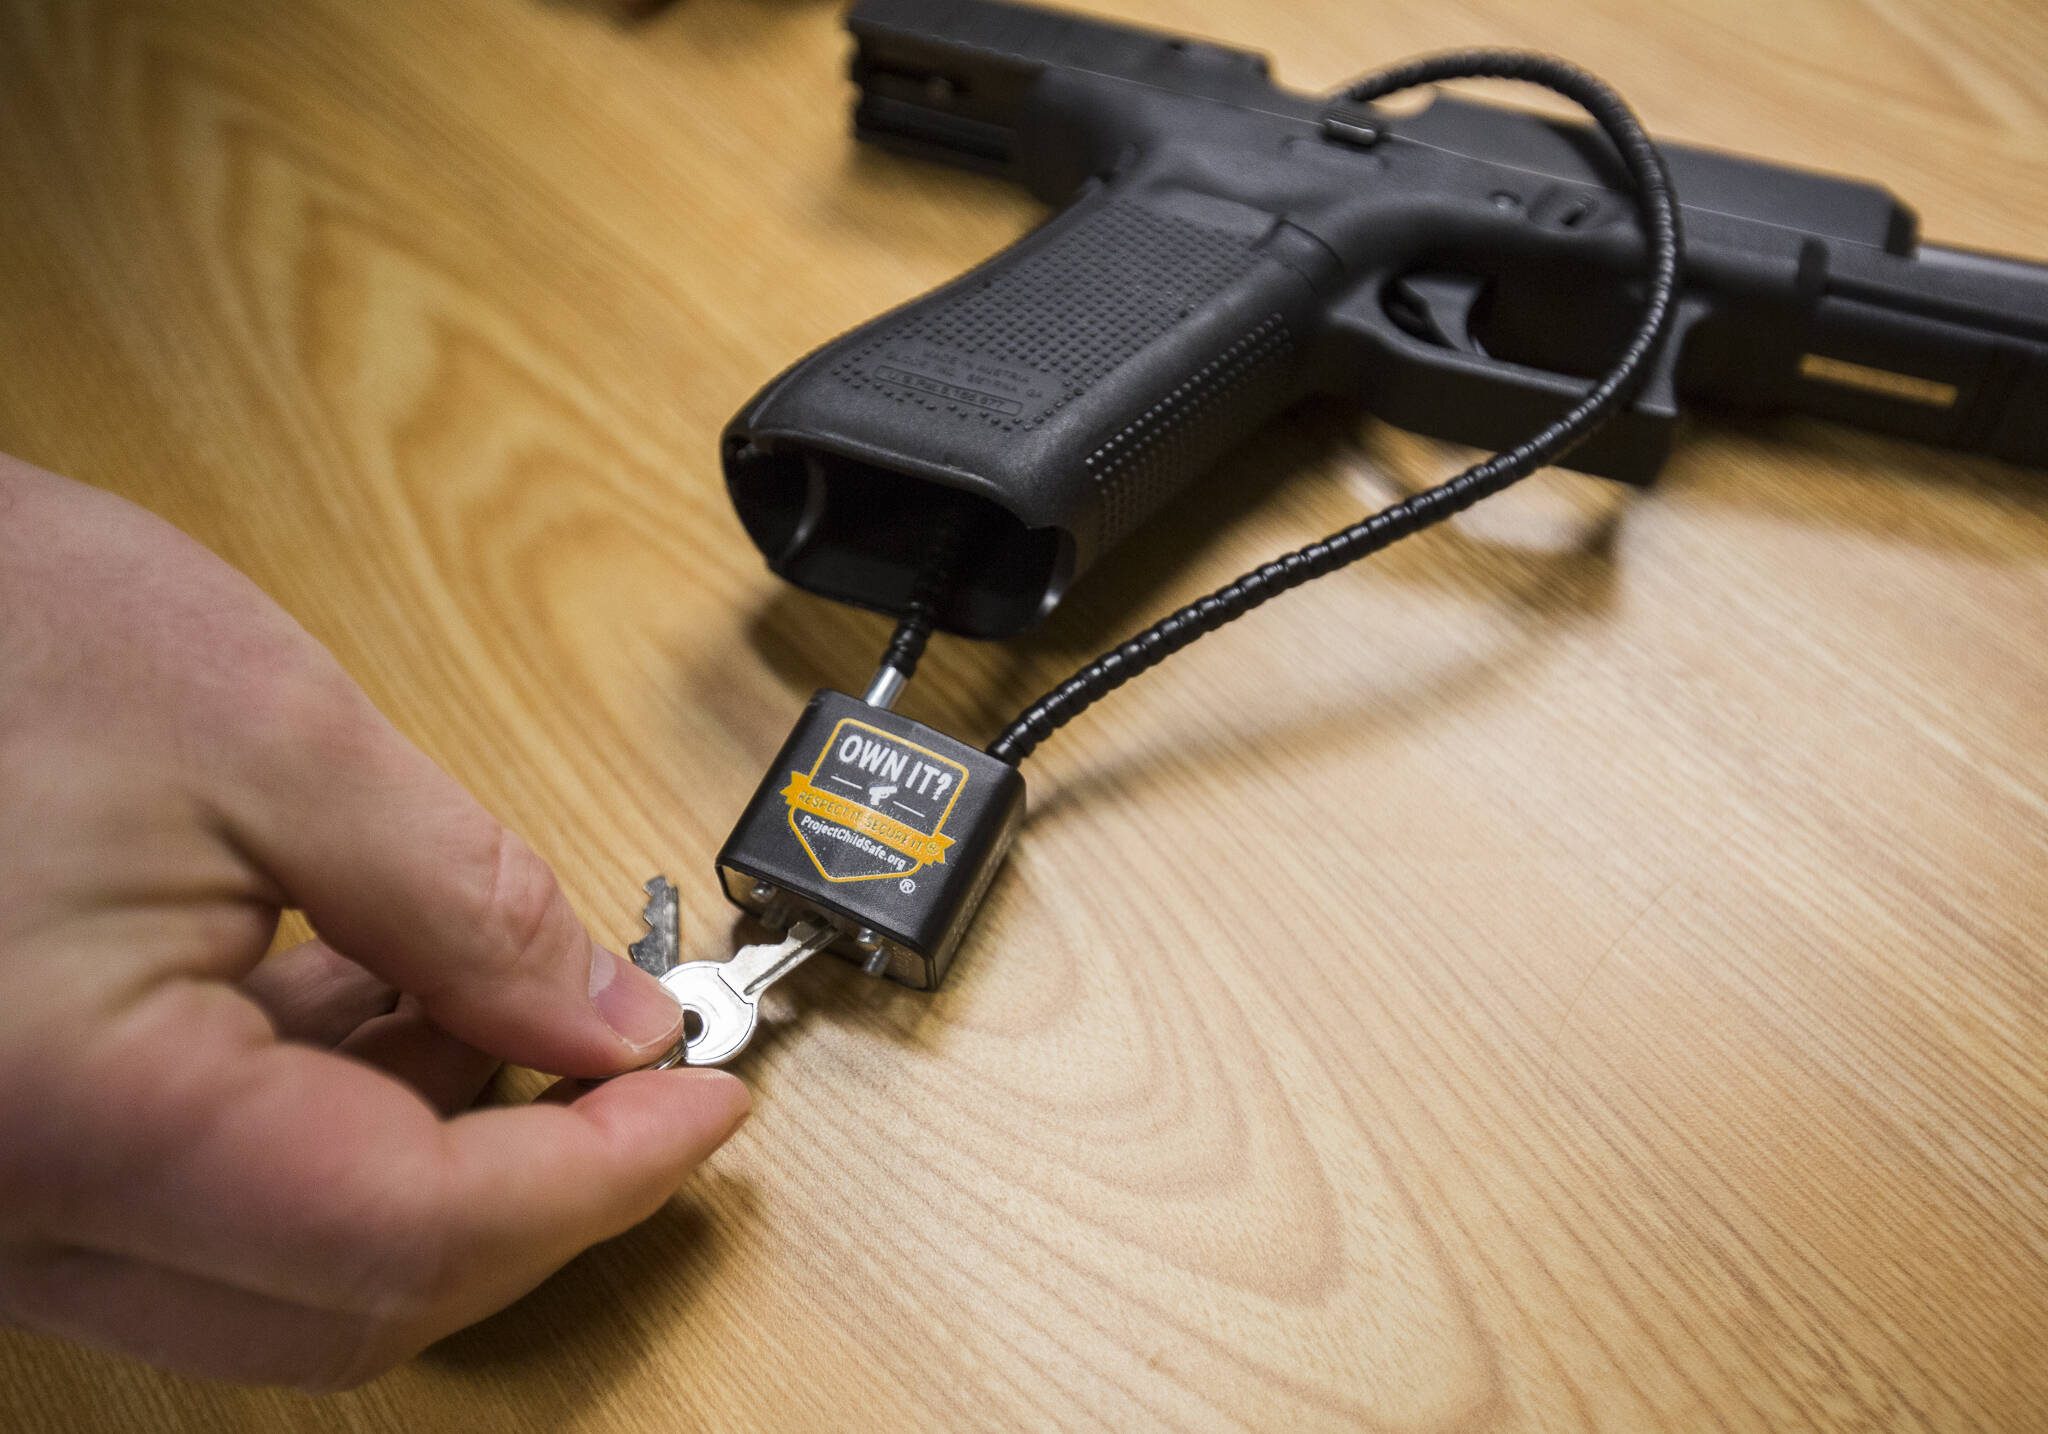 A Project Child Safe gun lock that is available at the Everett Police Department on Thursday, March 12, 2020 in Everett, Washington. (Olivia Vanni / The Herald)